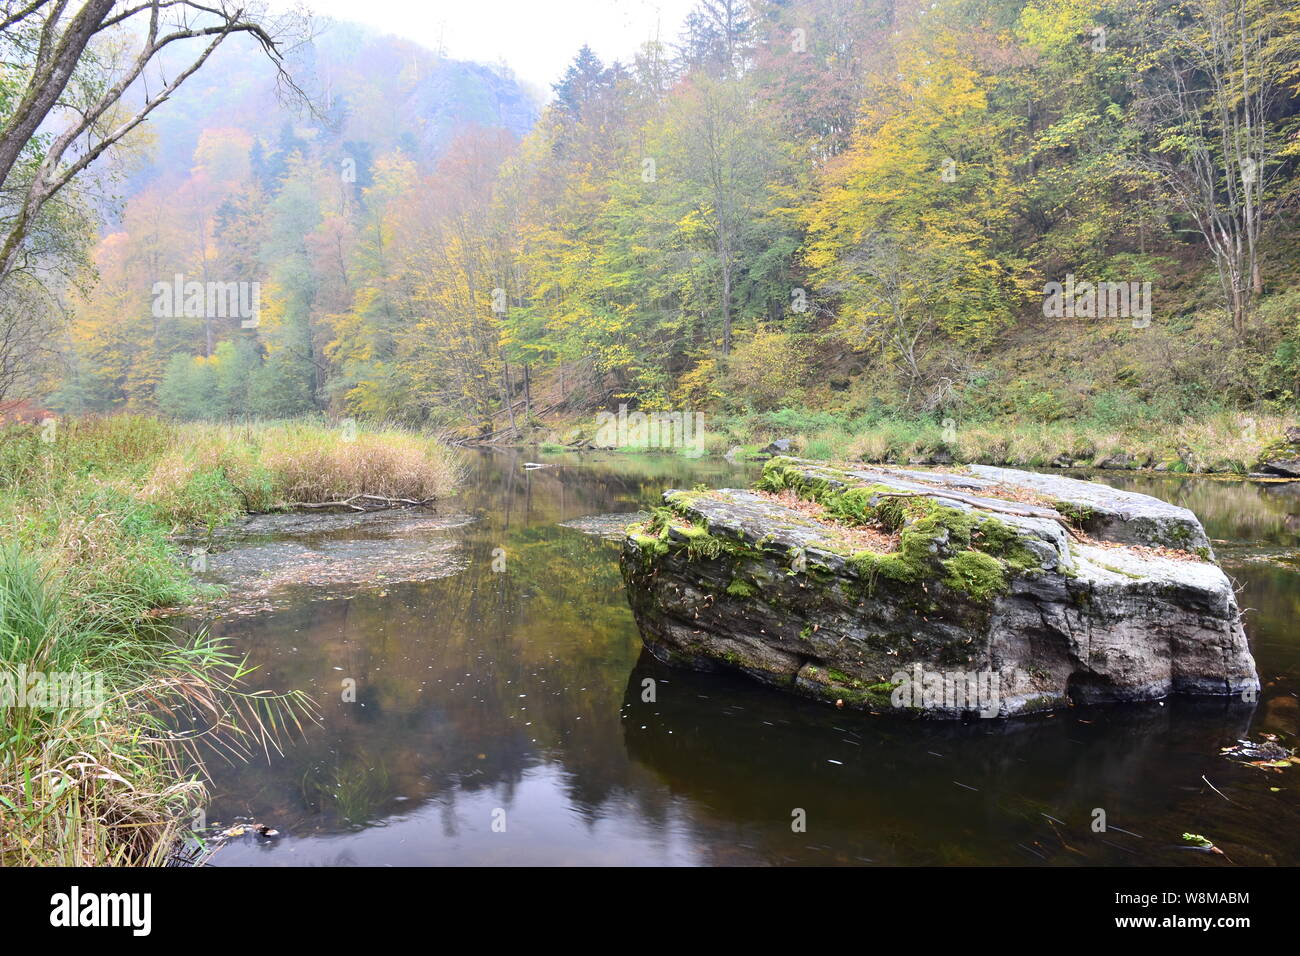 Kamp river, one of the last free-flowing major aquatic ecosystems in Austria, in the midst of natural primeval-like forest in autumn. Stock Photo